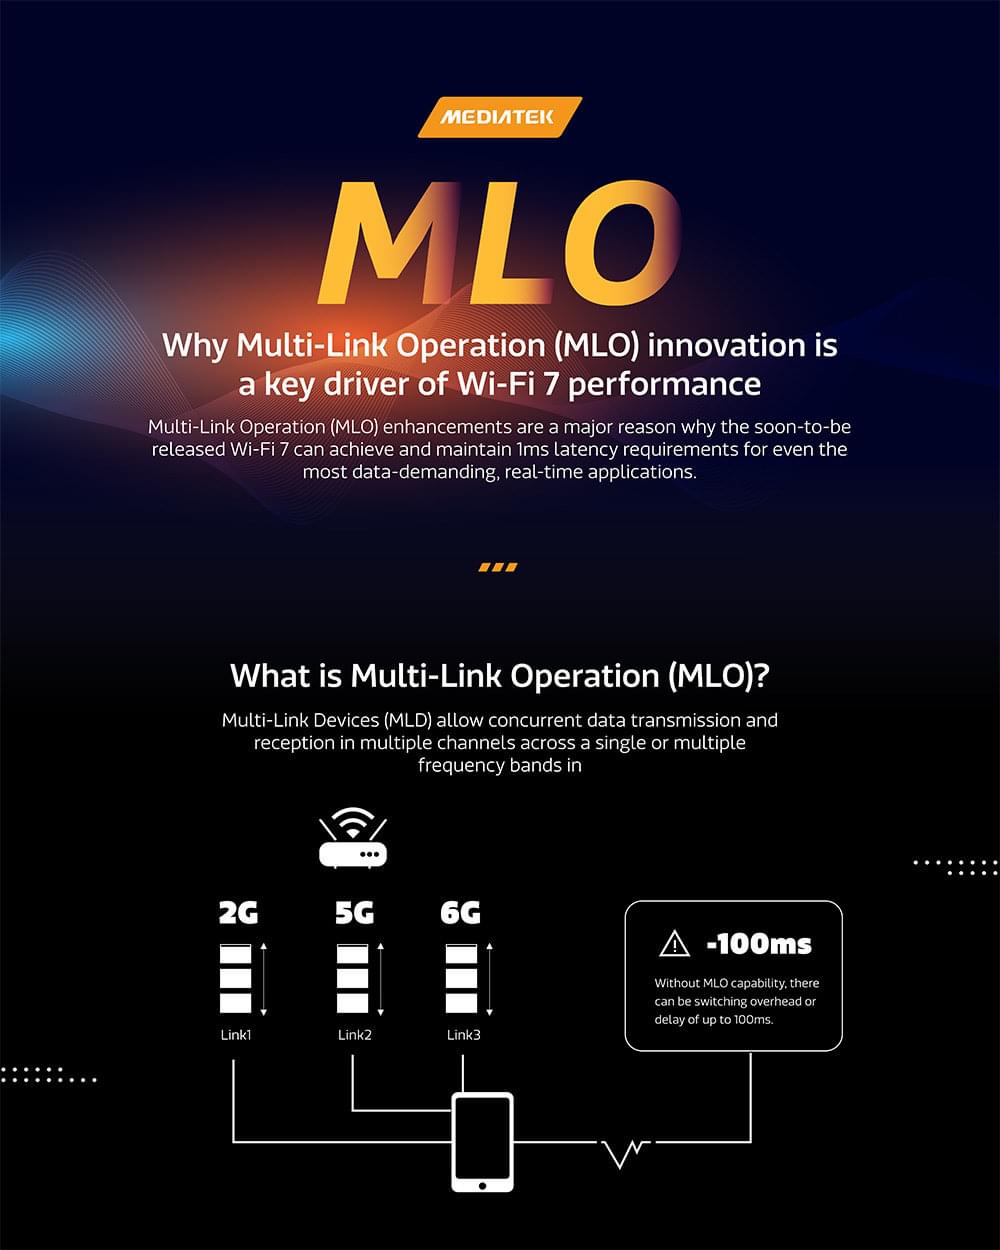 Discover why MLO is a key driver of Wi-Fi 7 performance